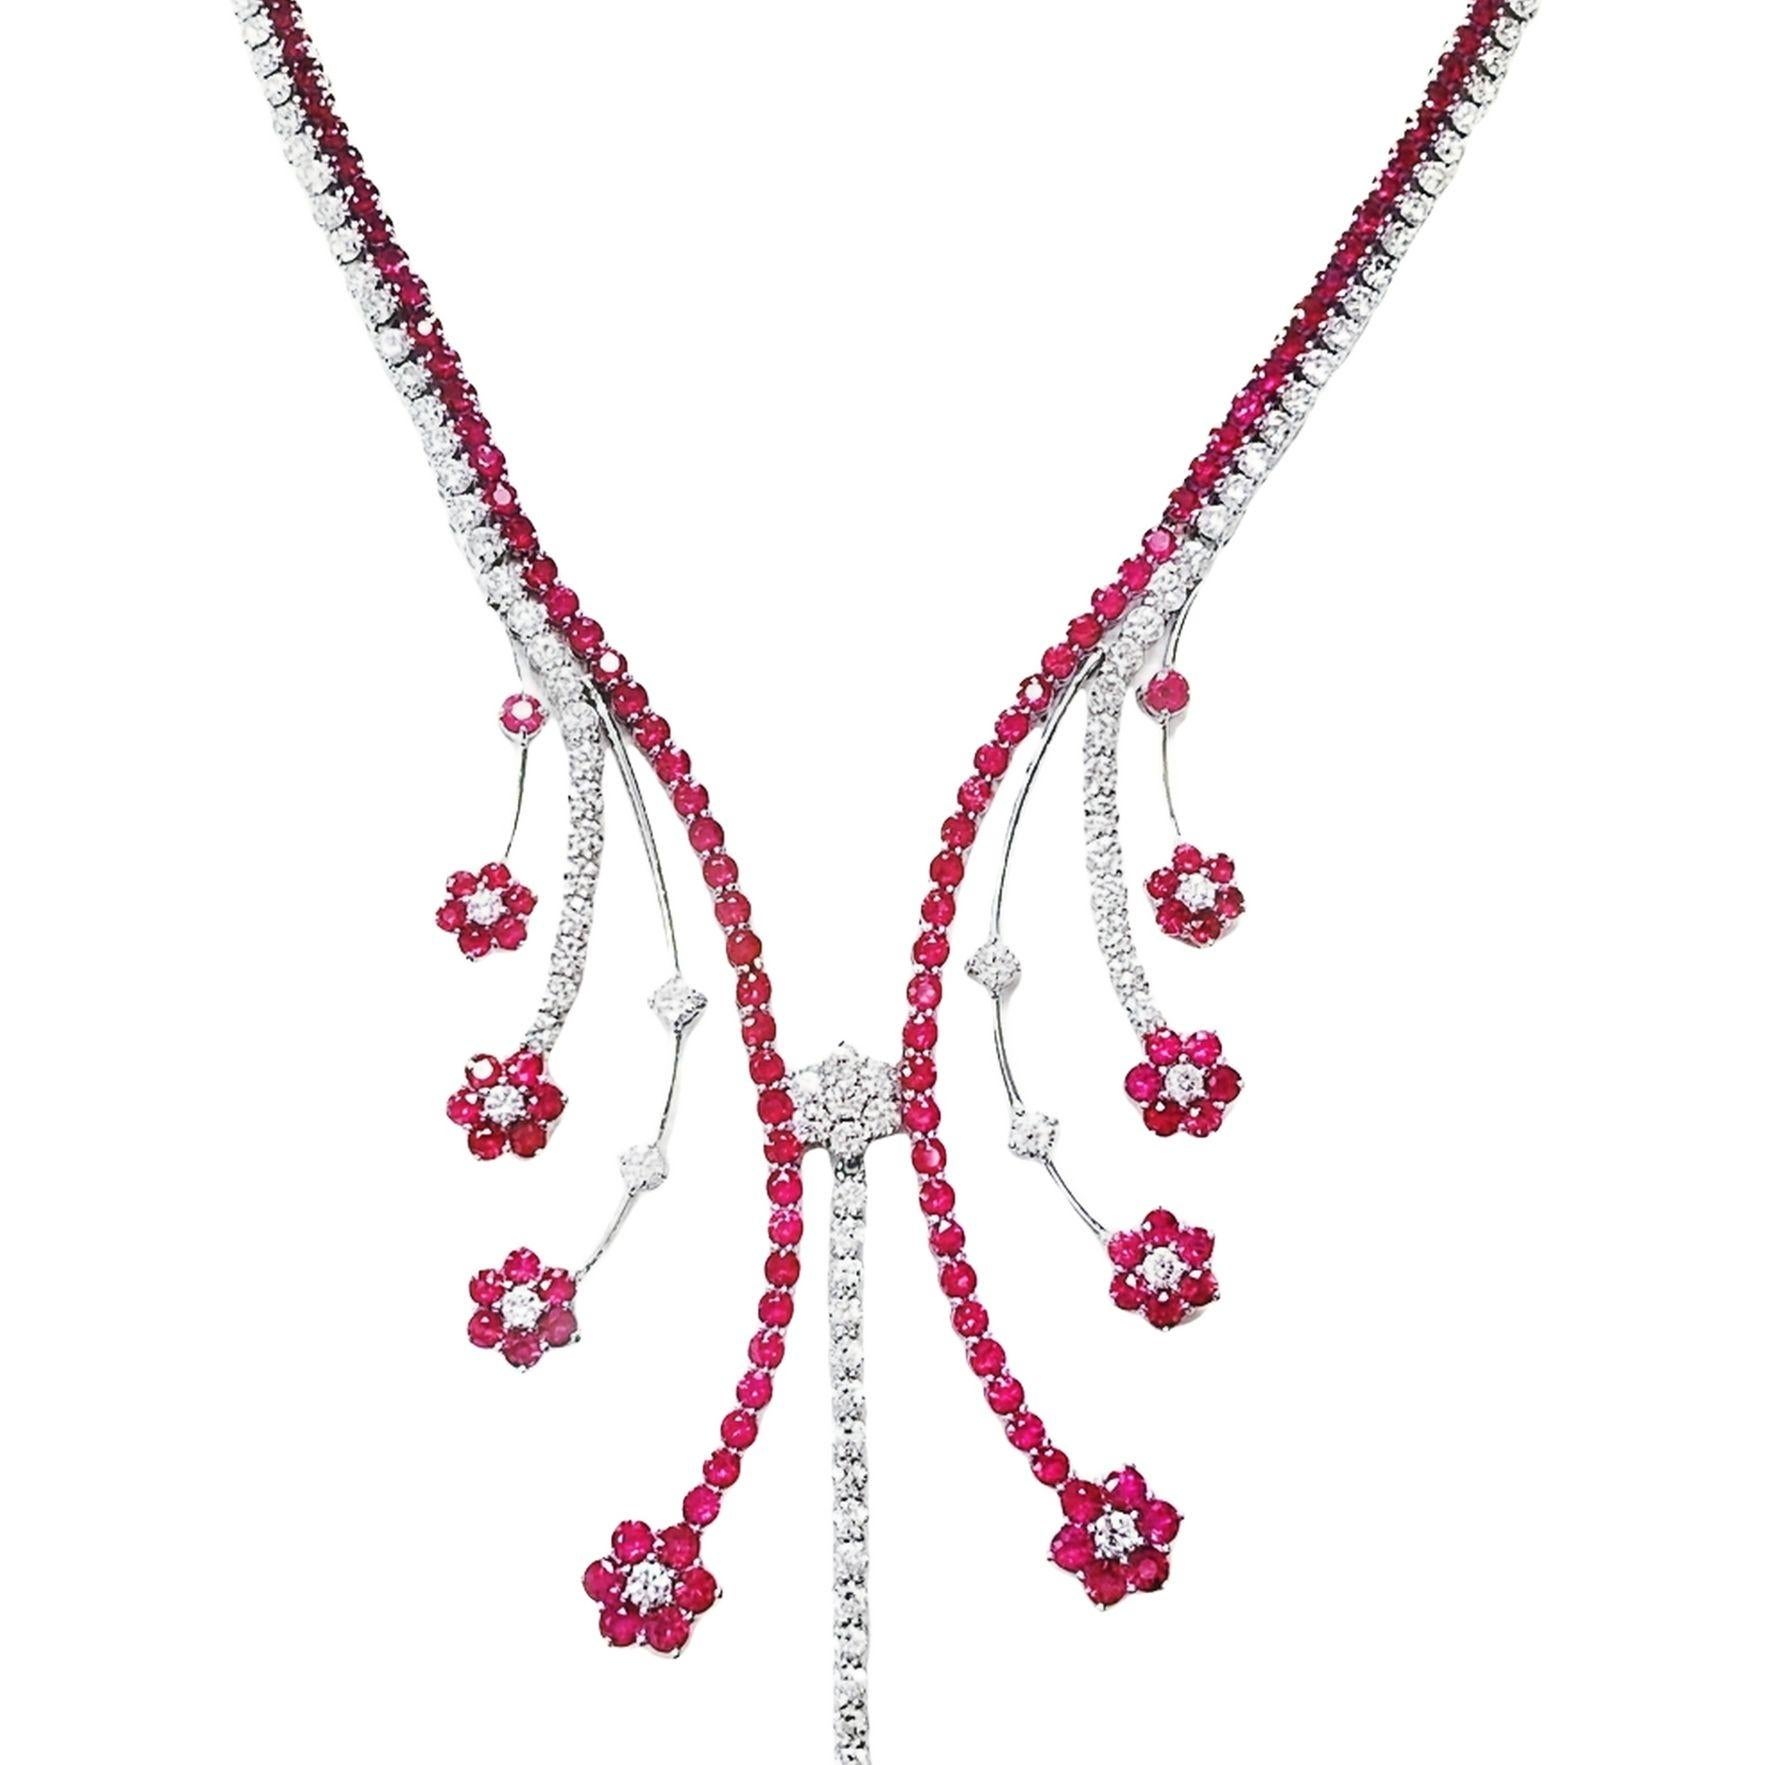 Prepare to be captivated by a majestic masterpiece necklace, featuring 152 Burma rubies with an intense purplish-red allure, elegantly accompanied by a breathtaking 9 carats of natural sparkling diamonds. This extraordinary creation is not just a